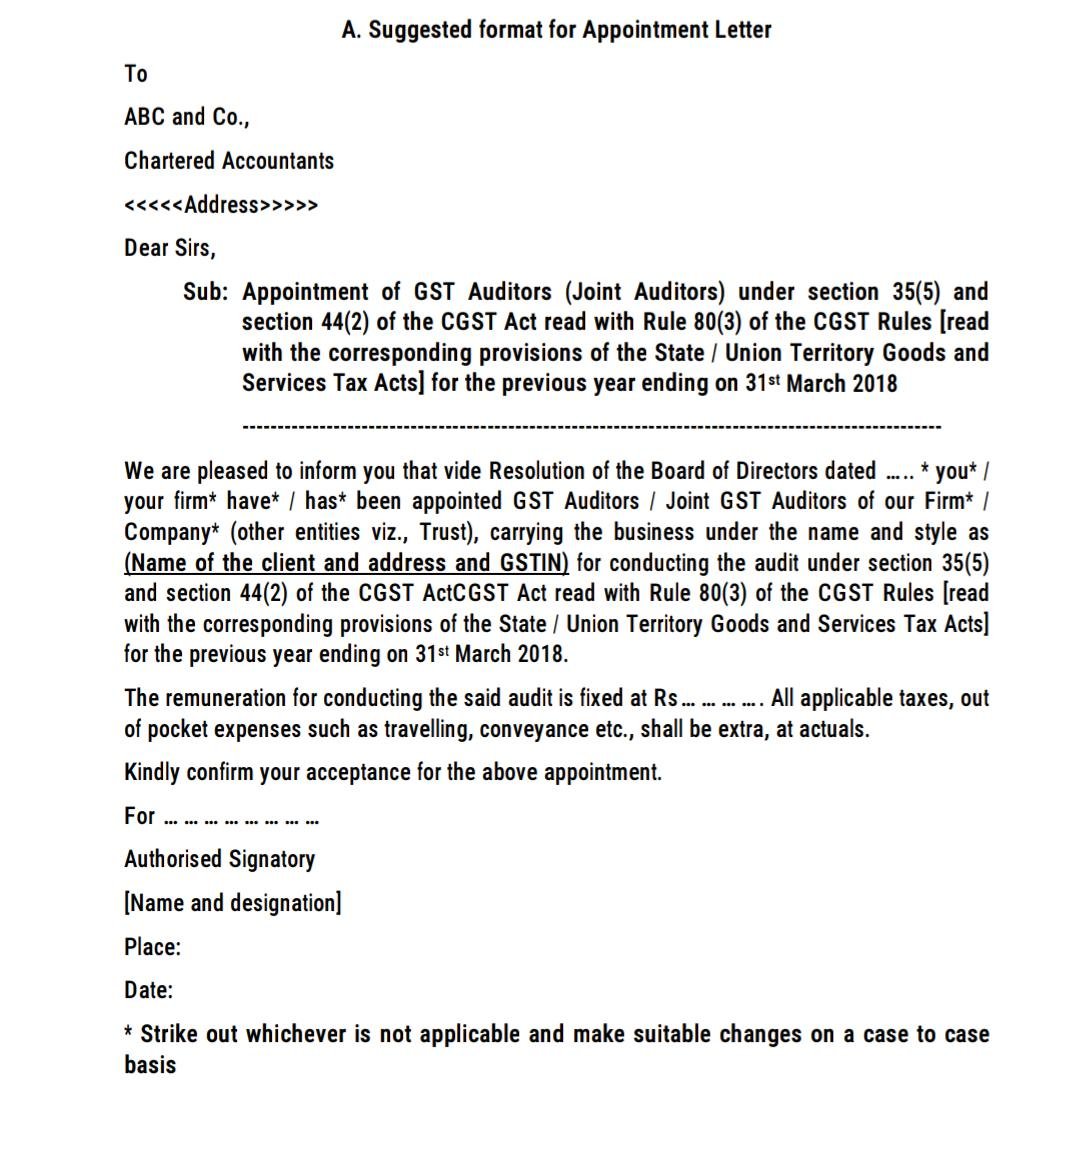 gst-auditor-appointment-letter-format